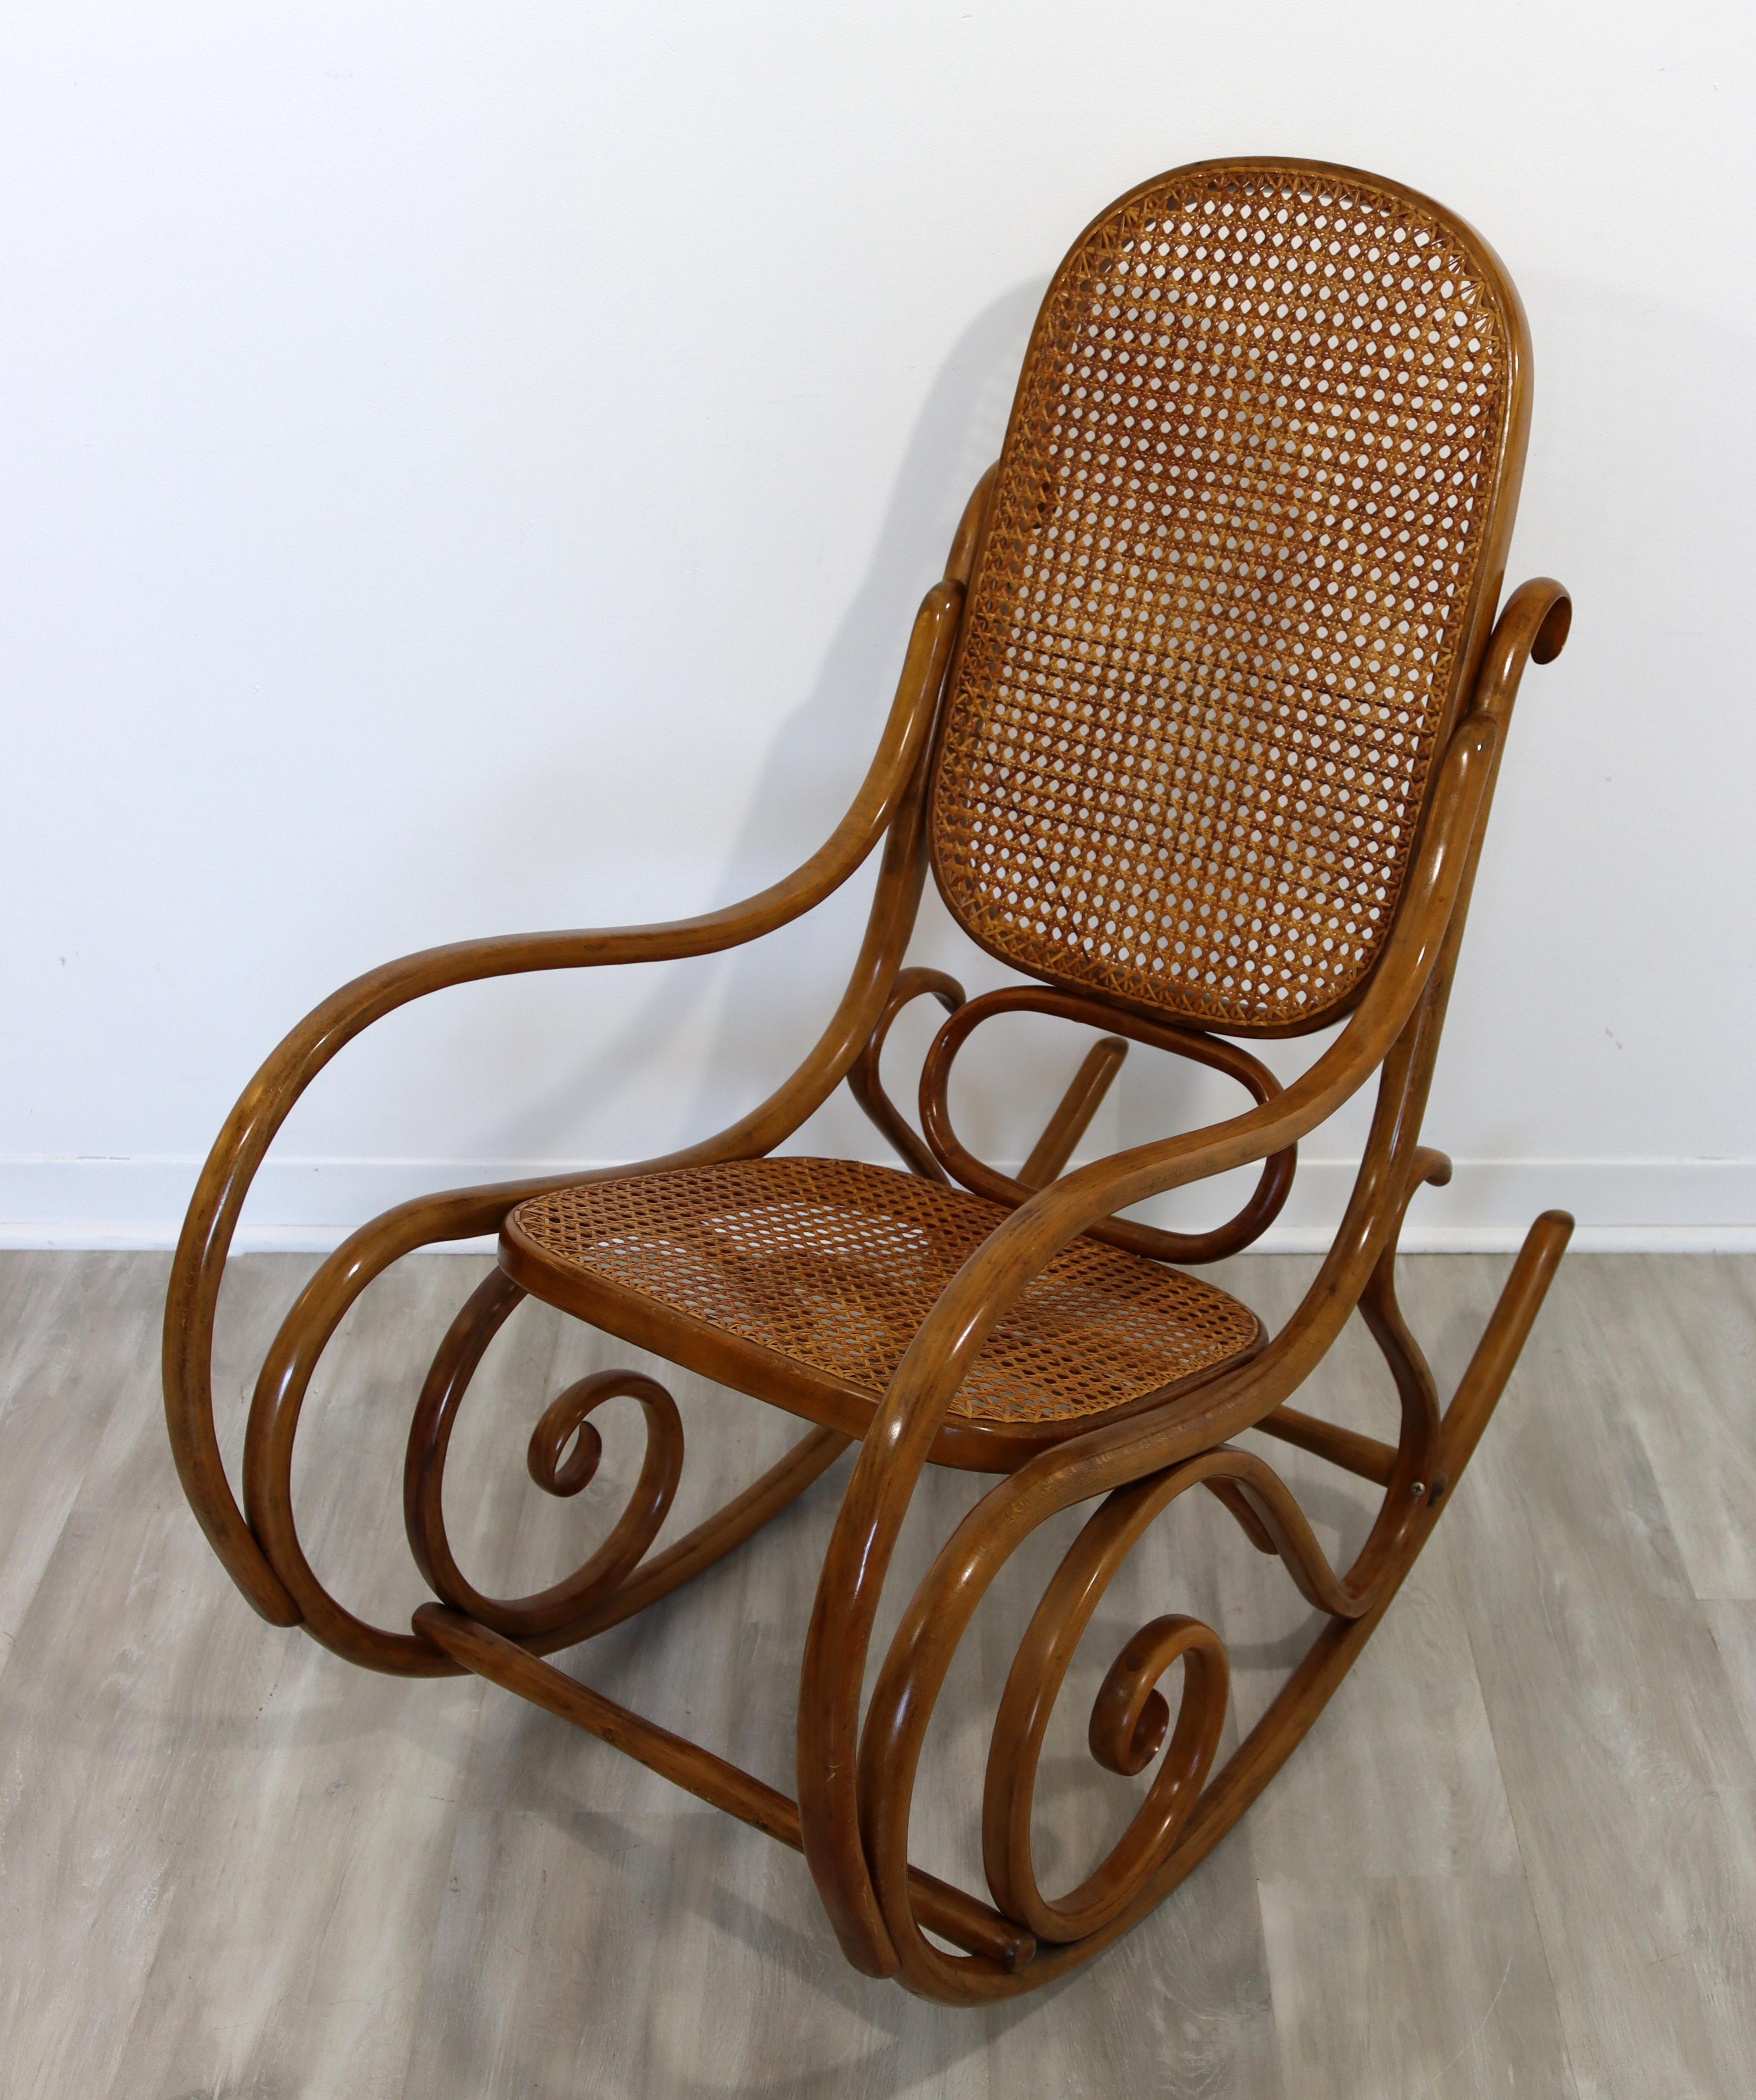 For your consideration is a magnificent, Schaukelstuhl rocking chair, with a cane back on bentwood, by Michael Thonet, circa the 1970s. In excellent vintage condition. The dimensions are 20.5